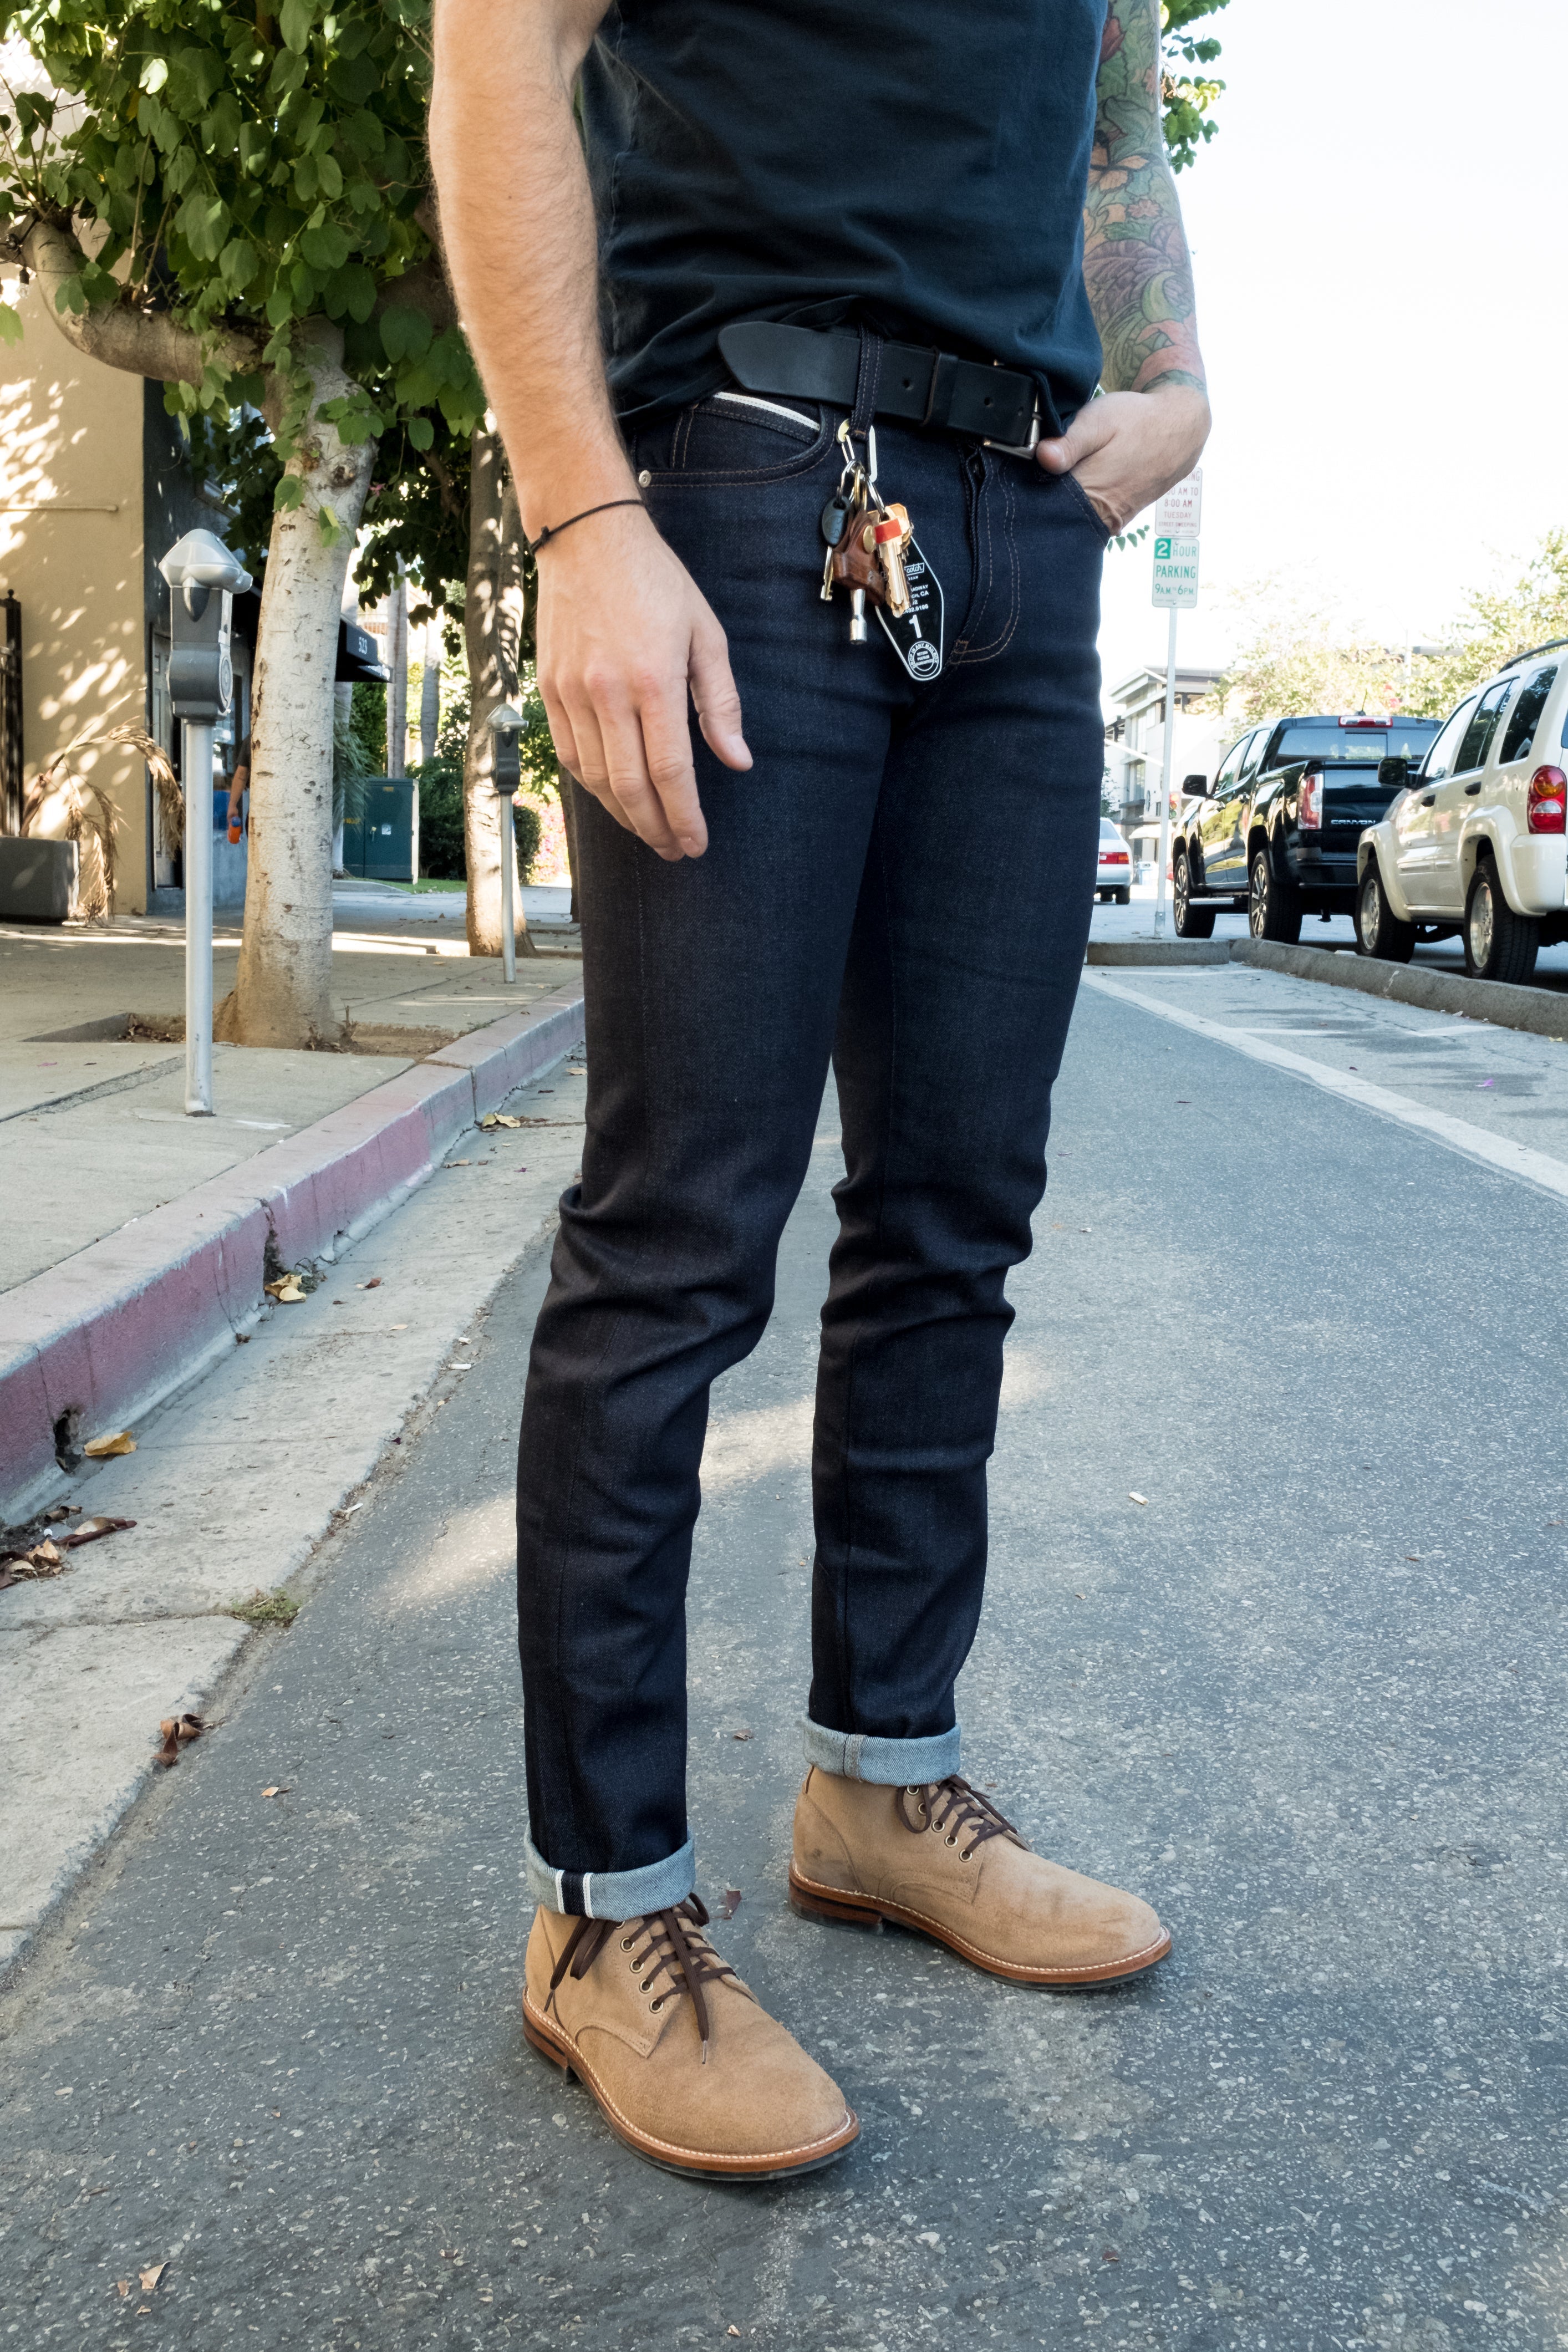 Naked & Famous - Super Guy - Night Shade Stretch Selvedge